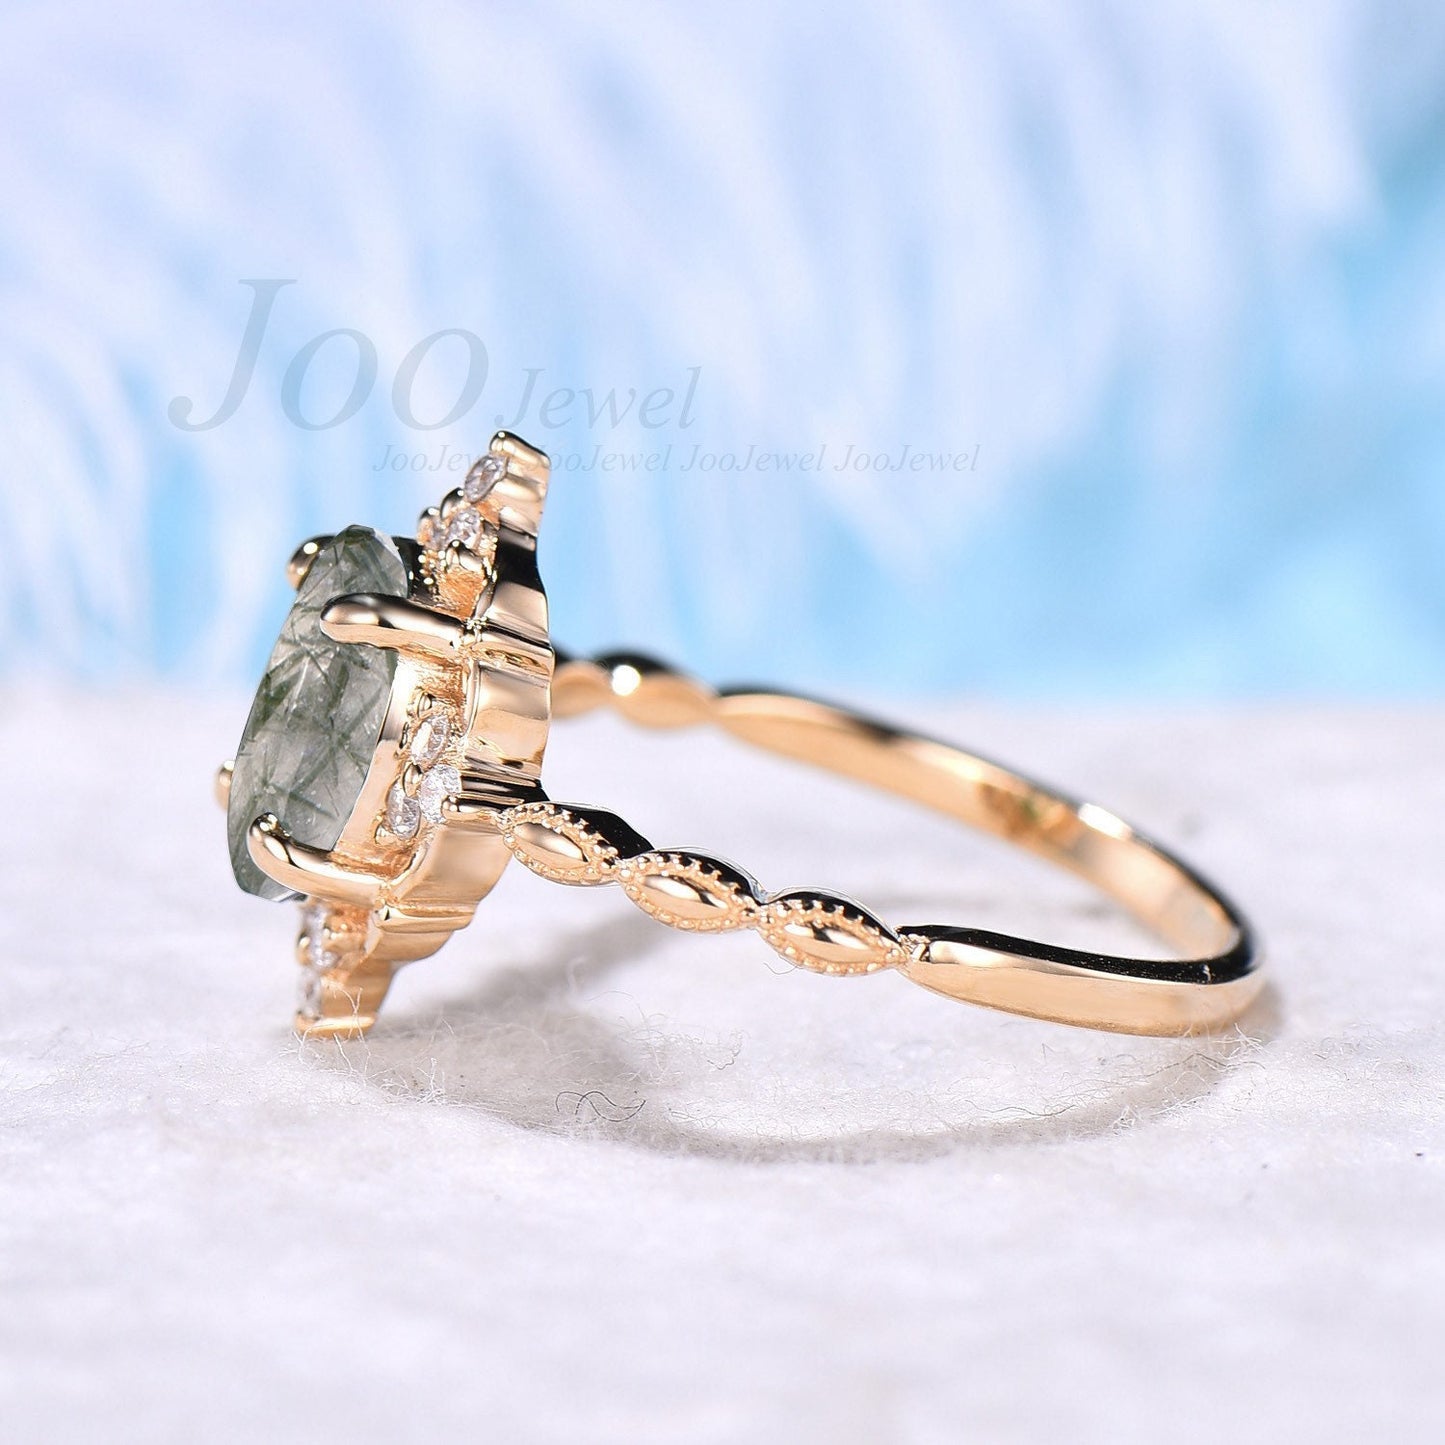 Natural Green Rutile Quartz Ring Unique Oval Solitaire Ring Green Crystal Ring ¡°PROTECT YOU FOREVER¡± Engagements Ring Anniversary Gift Women